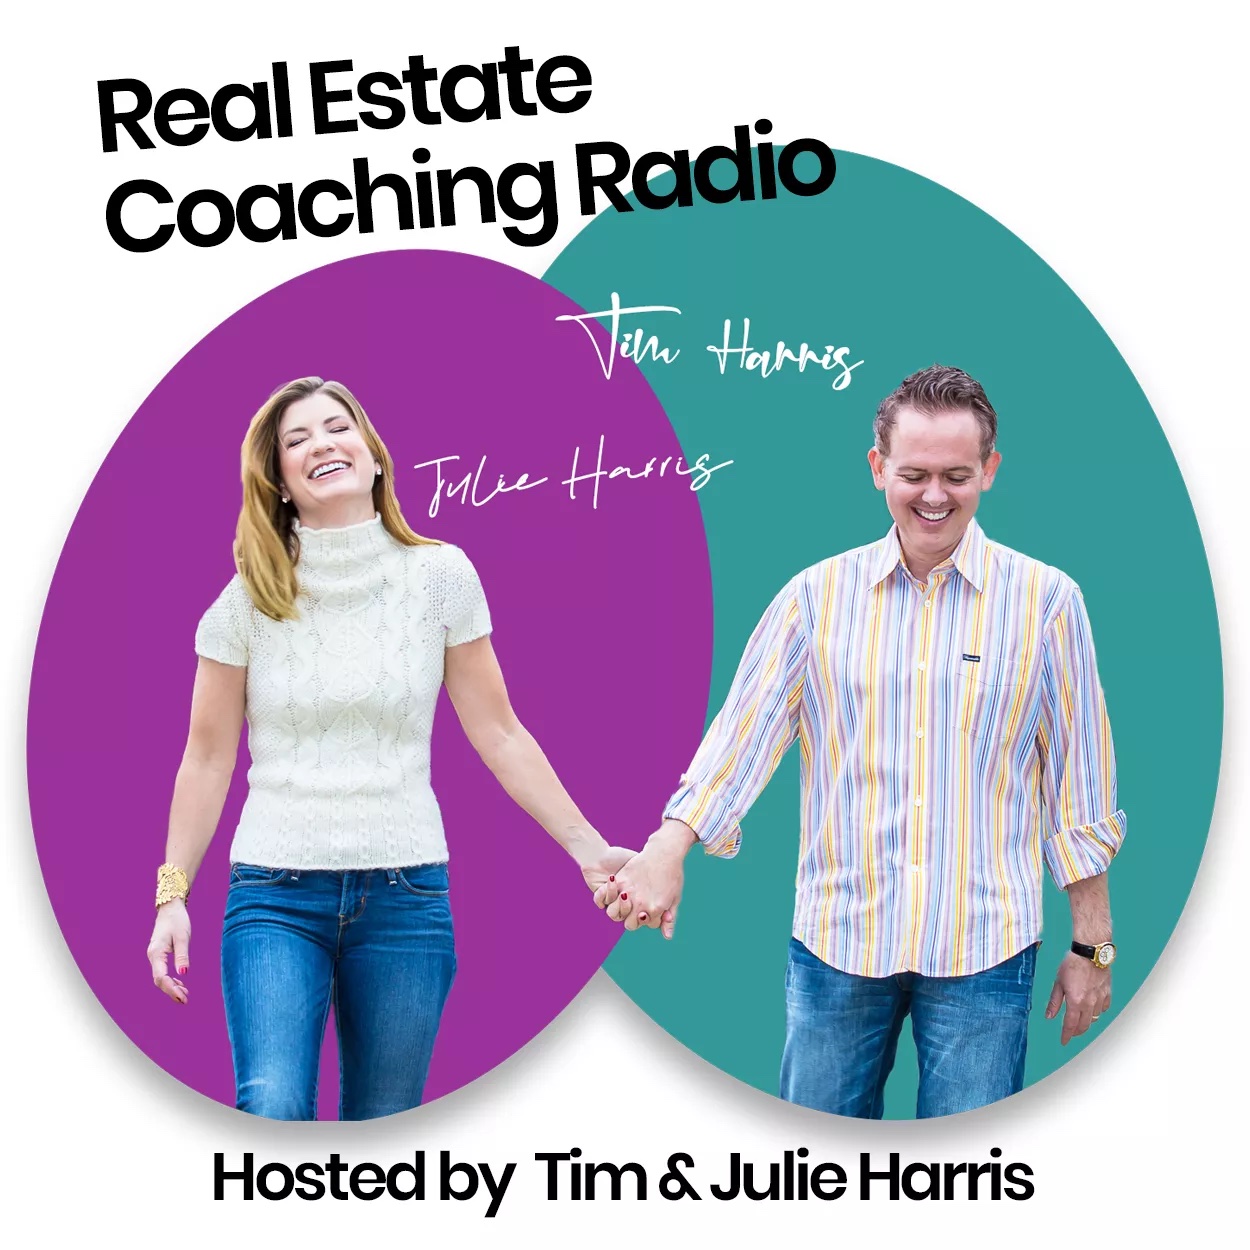 Fresh update on "top five" discussed on Real Estate Coaching Radio